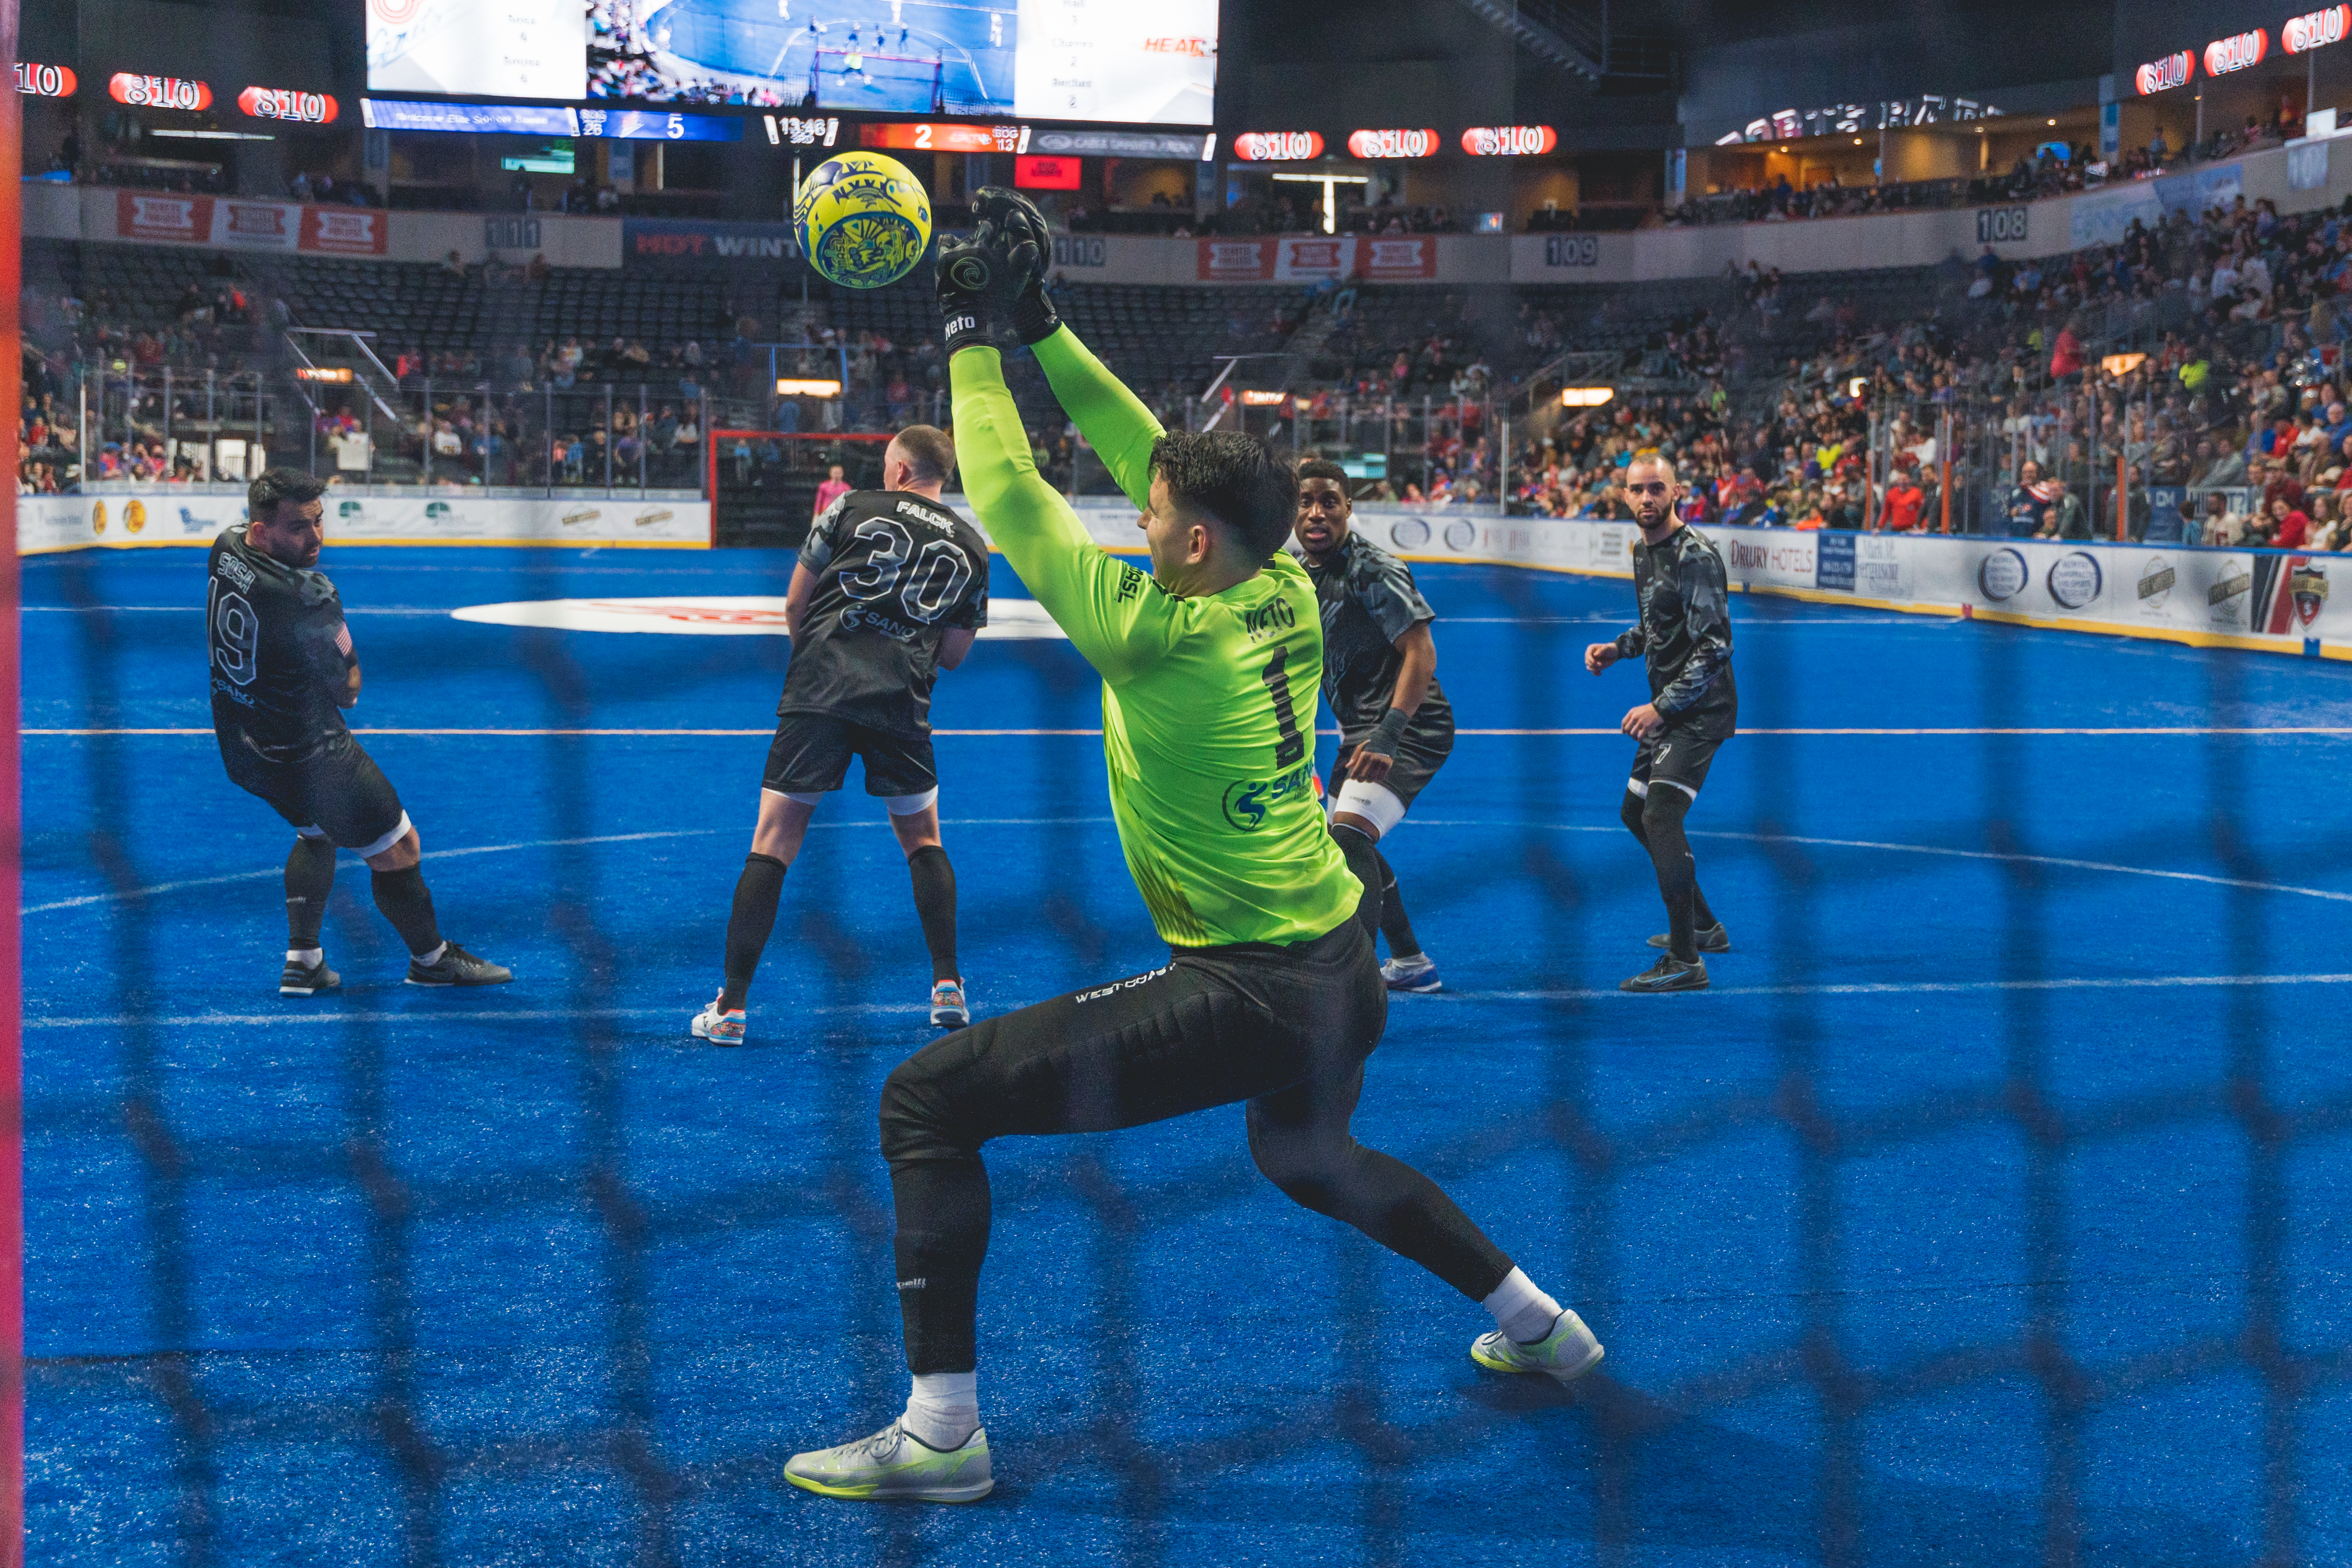 A soccer goalie in a bright yellow vest blocks a soccer ball heading for the goal